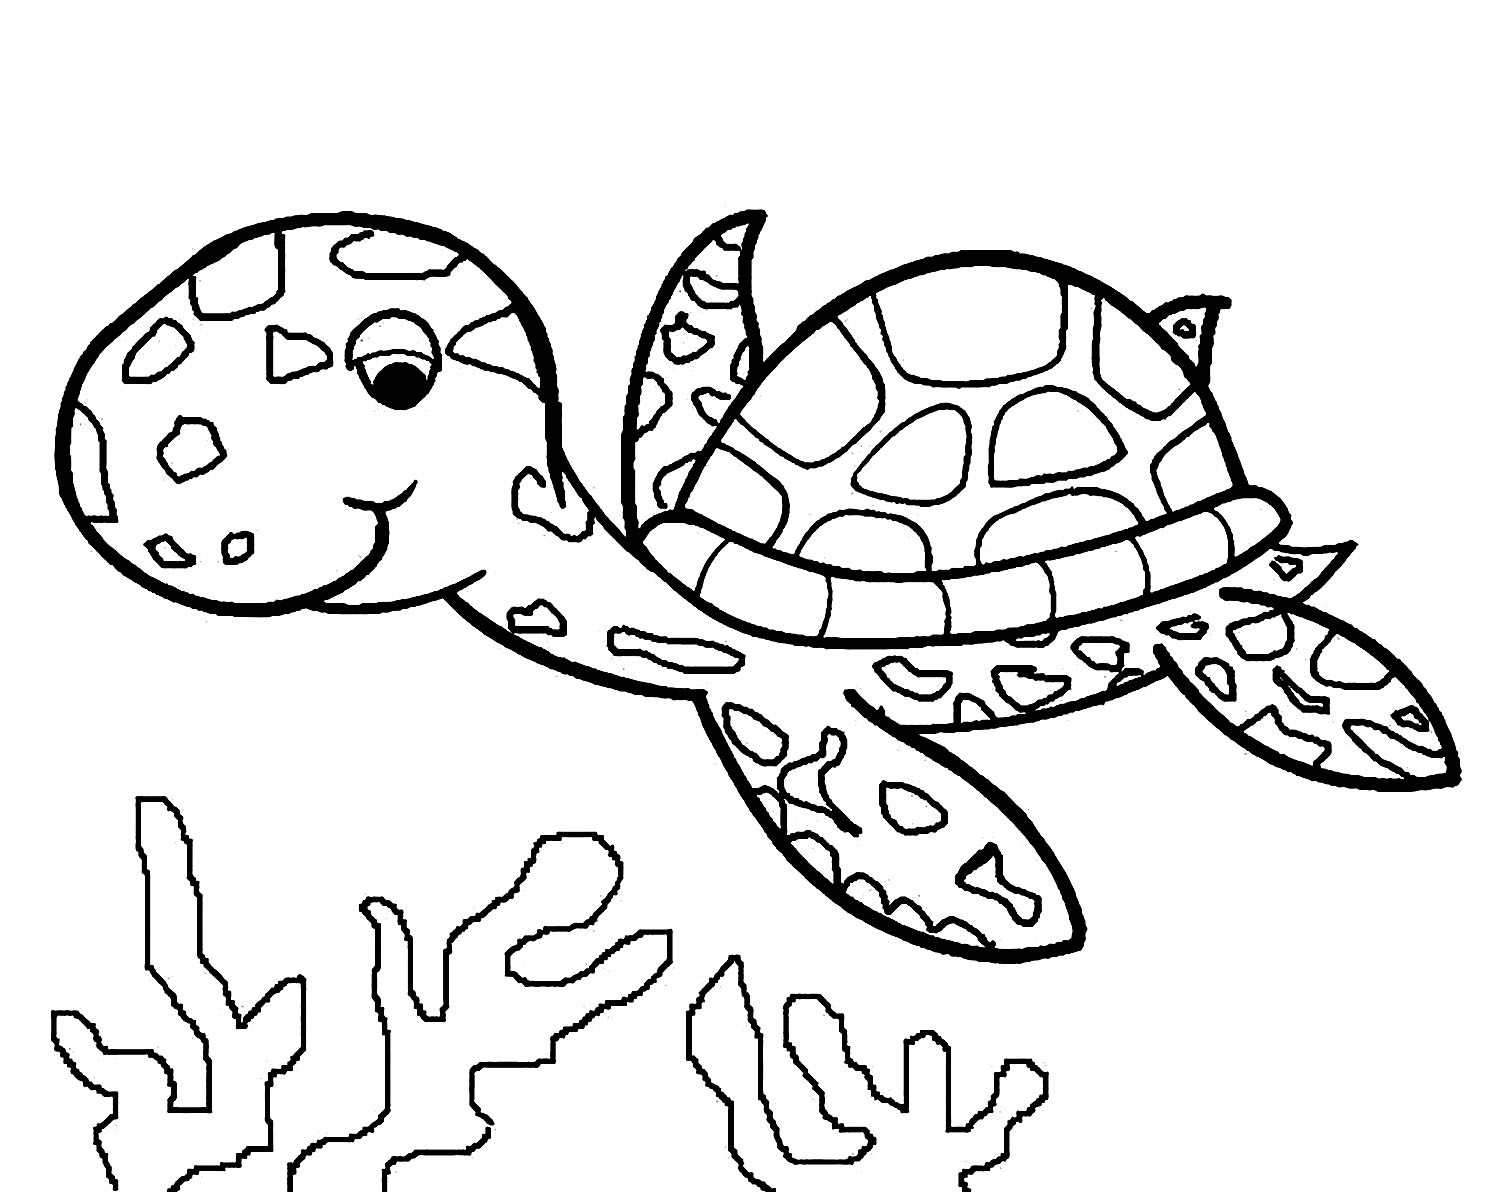 Coloring Sheets Kids
 Turtles to print Turtles Kids Coloring Pages